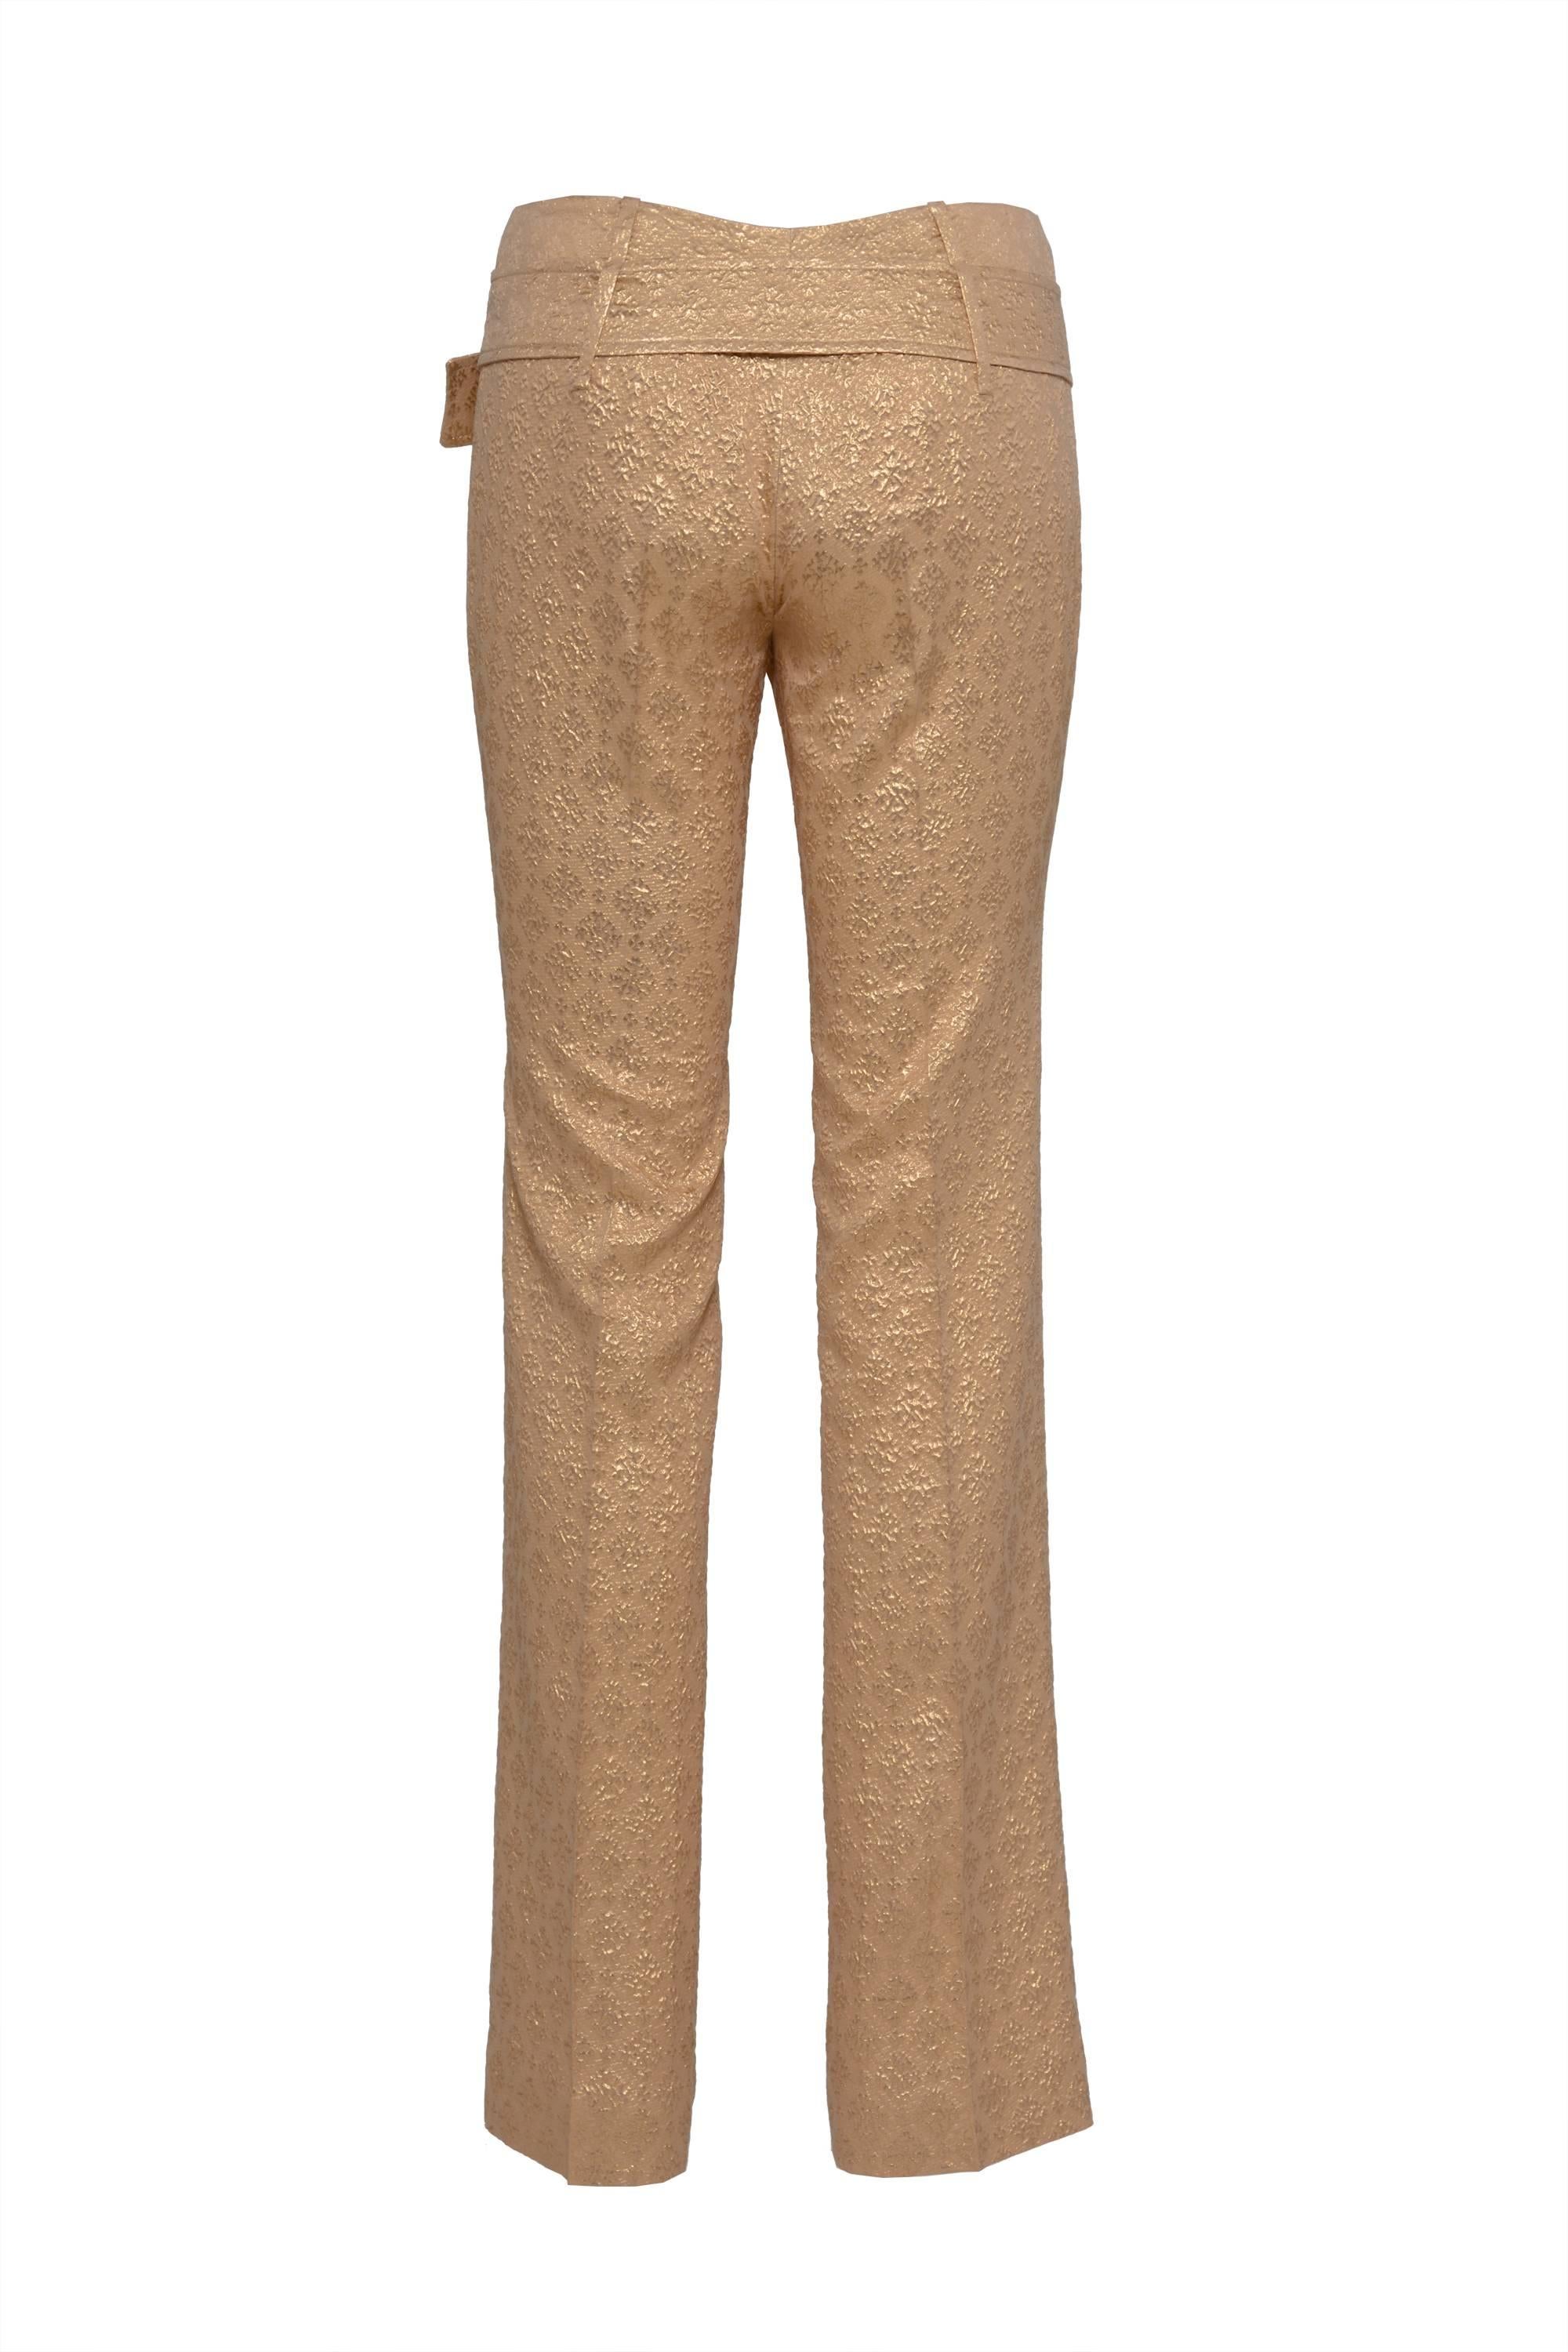 These PRADA gold pants have a special texture due to the jacquard weaving technique, snowflake rhombus, and cross patterns, the pants have double belt loops and self-extended waistband, they don't have pockets, zip, hook and bar closure. It includes